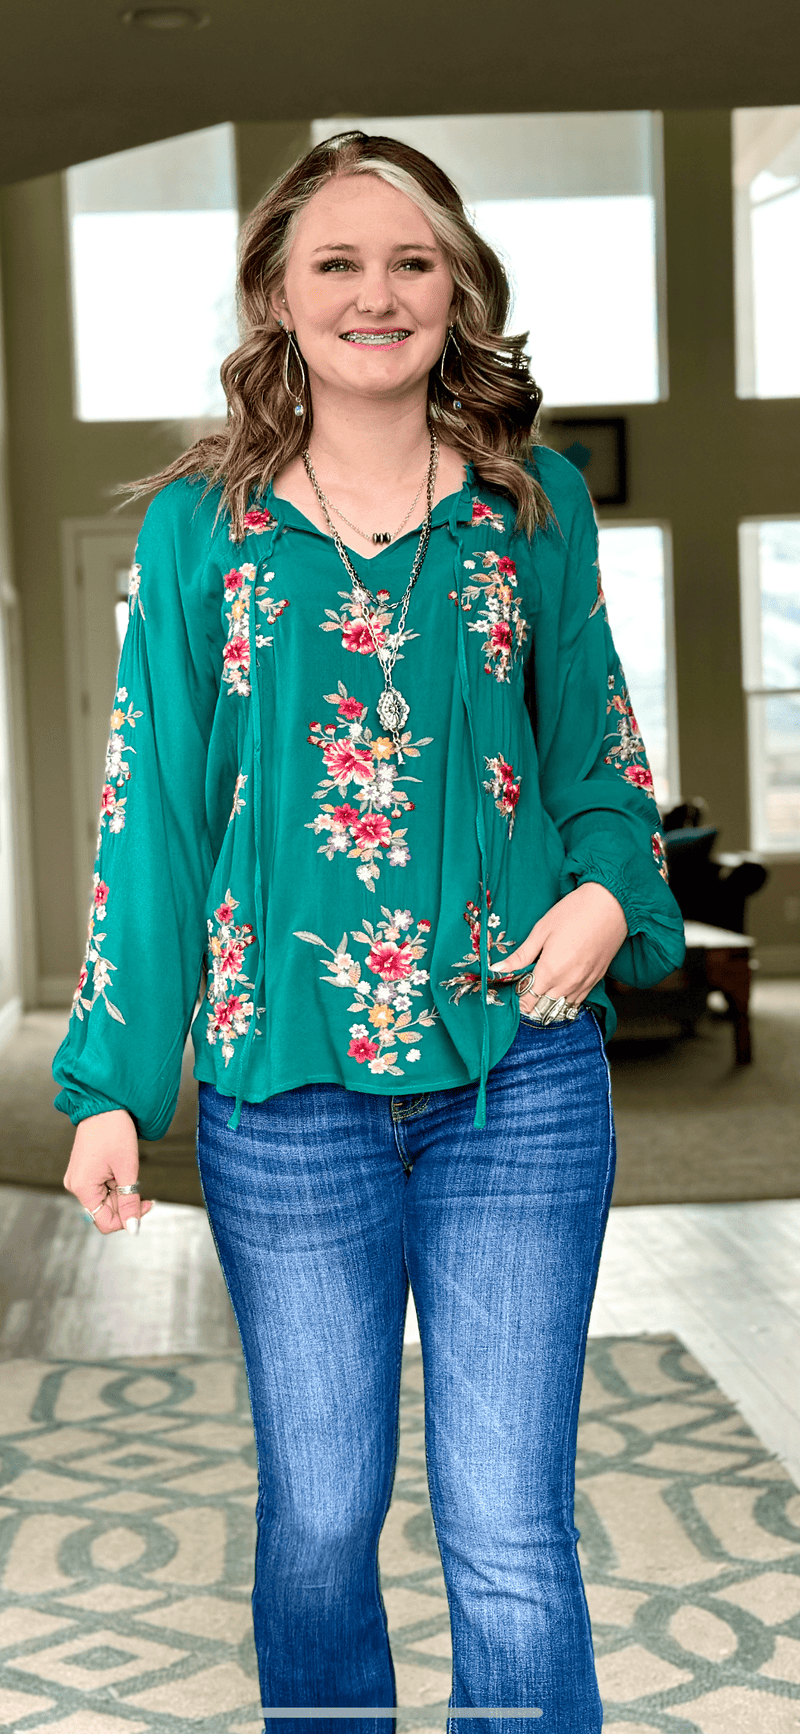 The Las Chisas Spring Embroidered Top